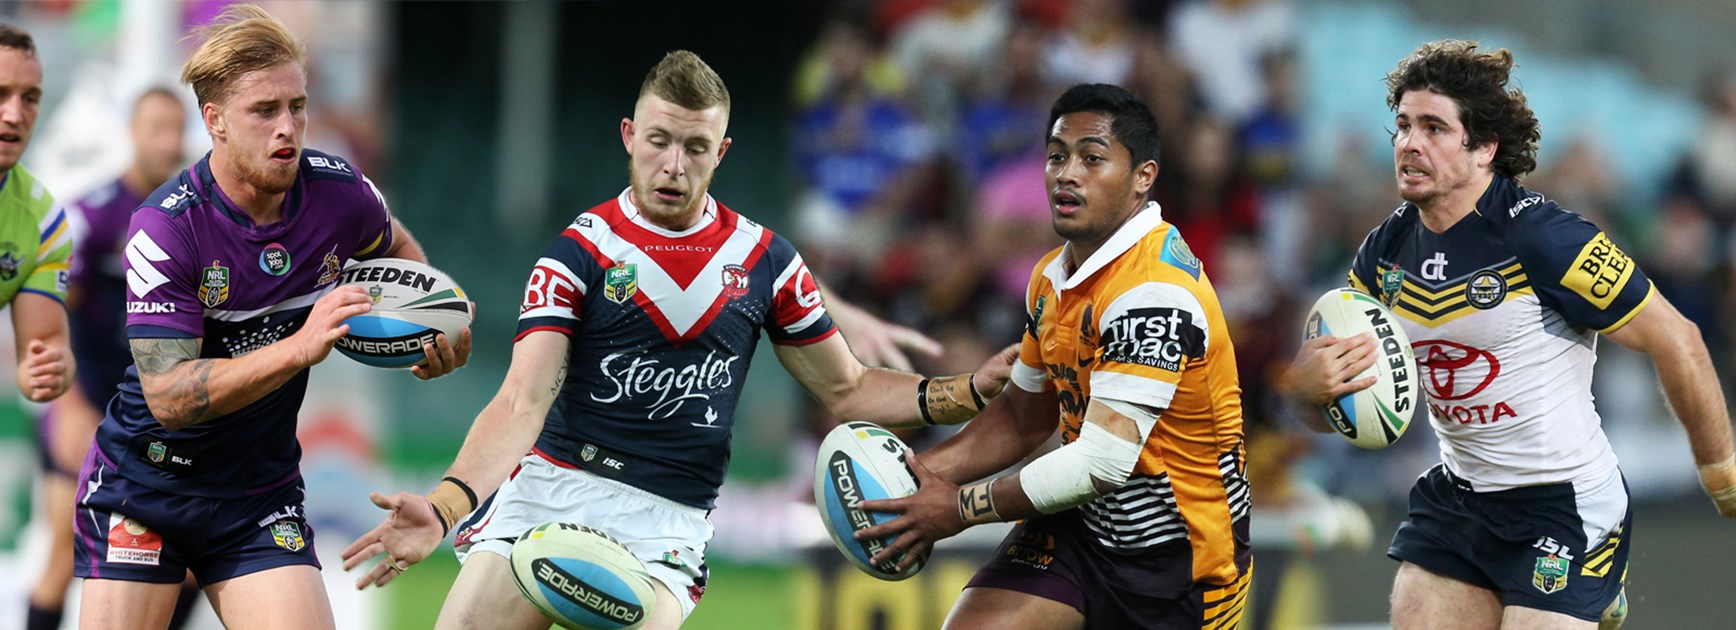 Cameron Munster, Jackson Hastings, Anthony Milford and Jake Granville all enjoyed breakout seasons in 2015.